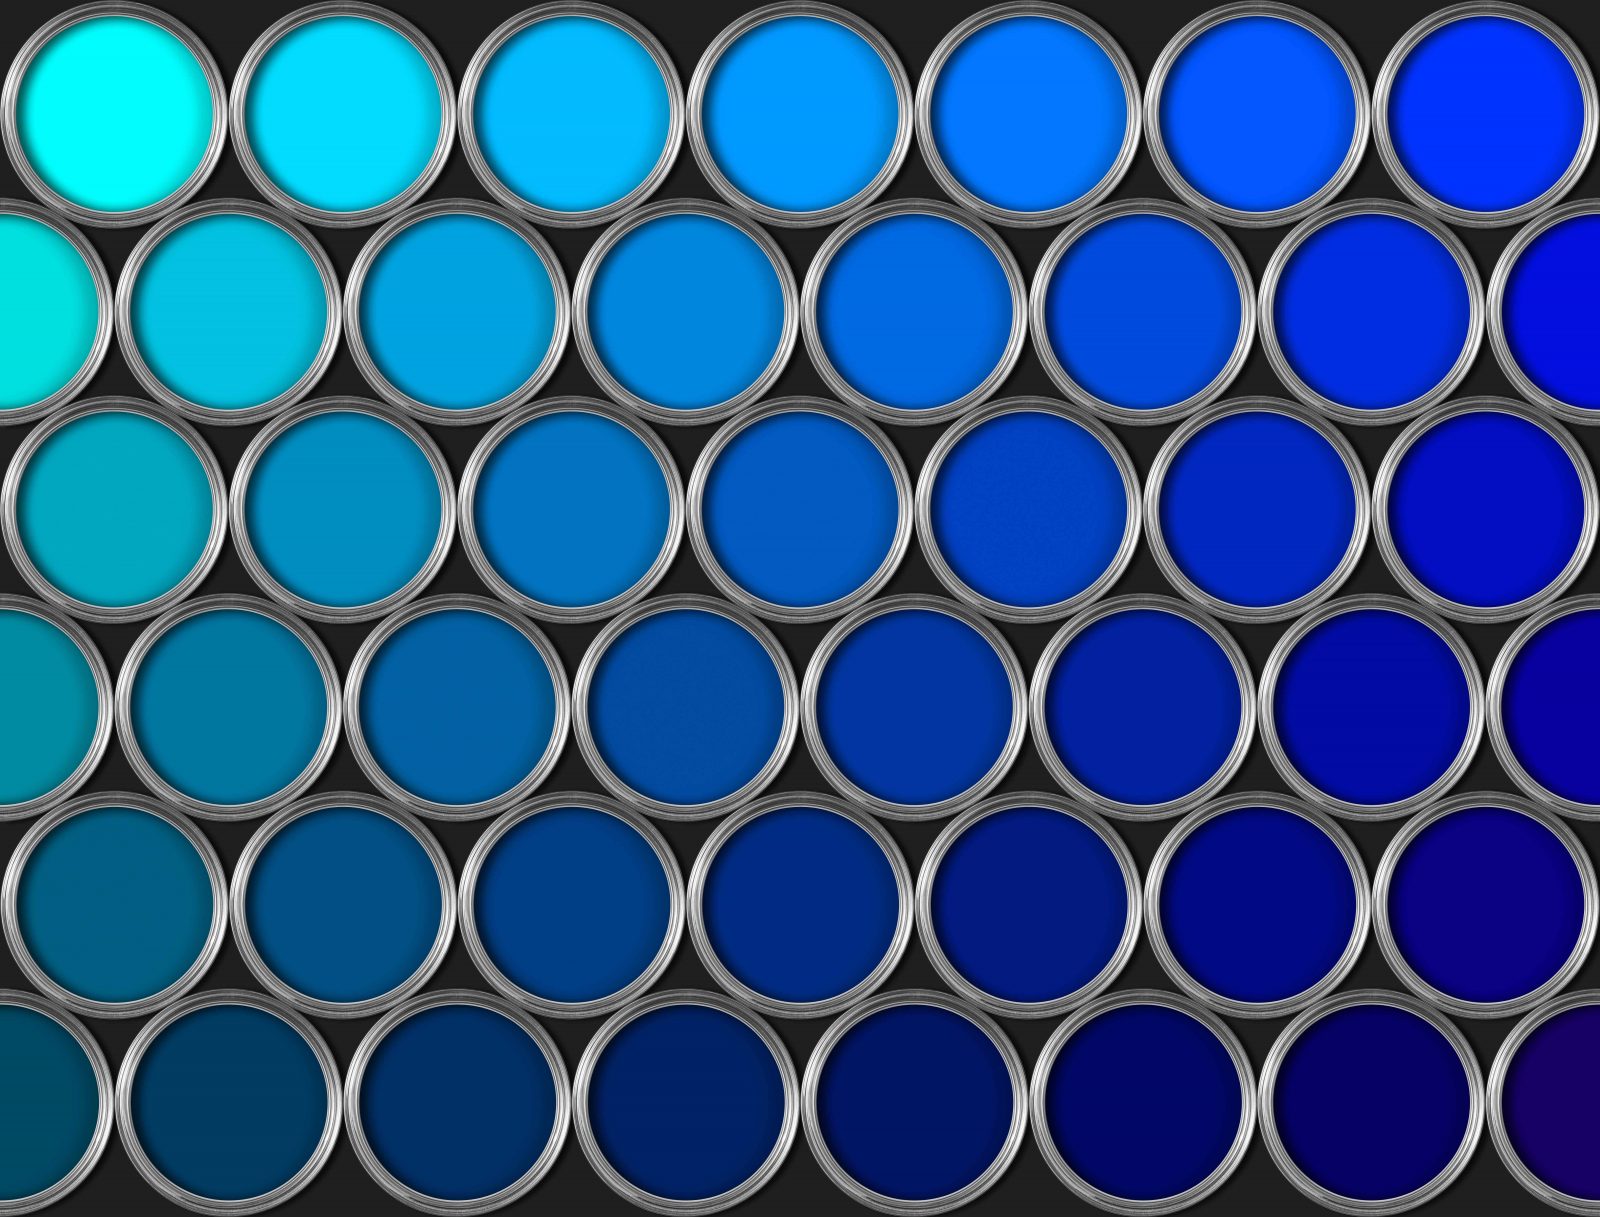 😇 This Test Will Reveal One Good and One Bad Truth About You 😈 Tins of blue paint in rows on black background